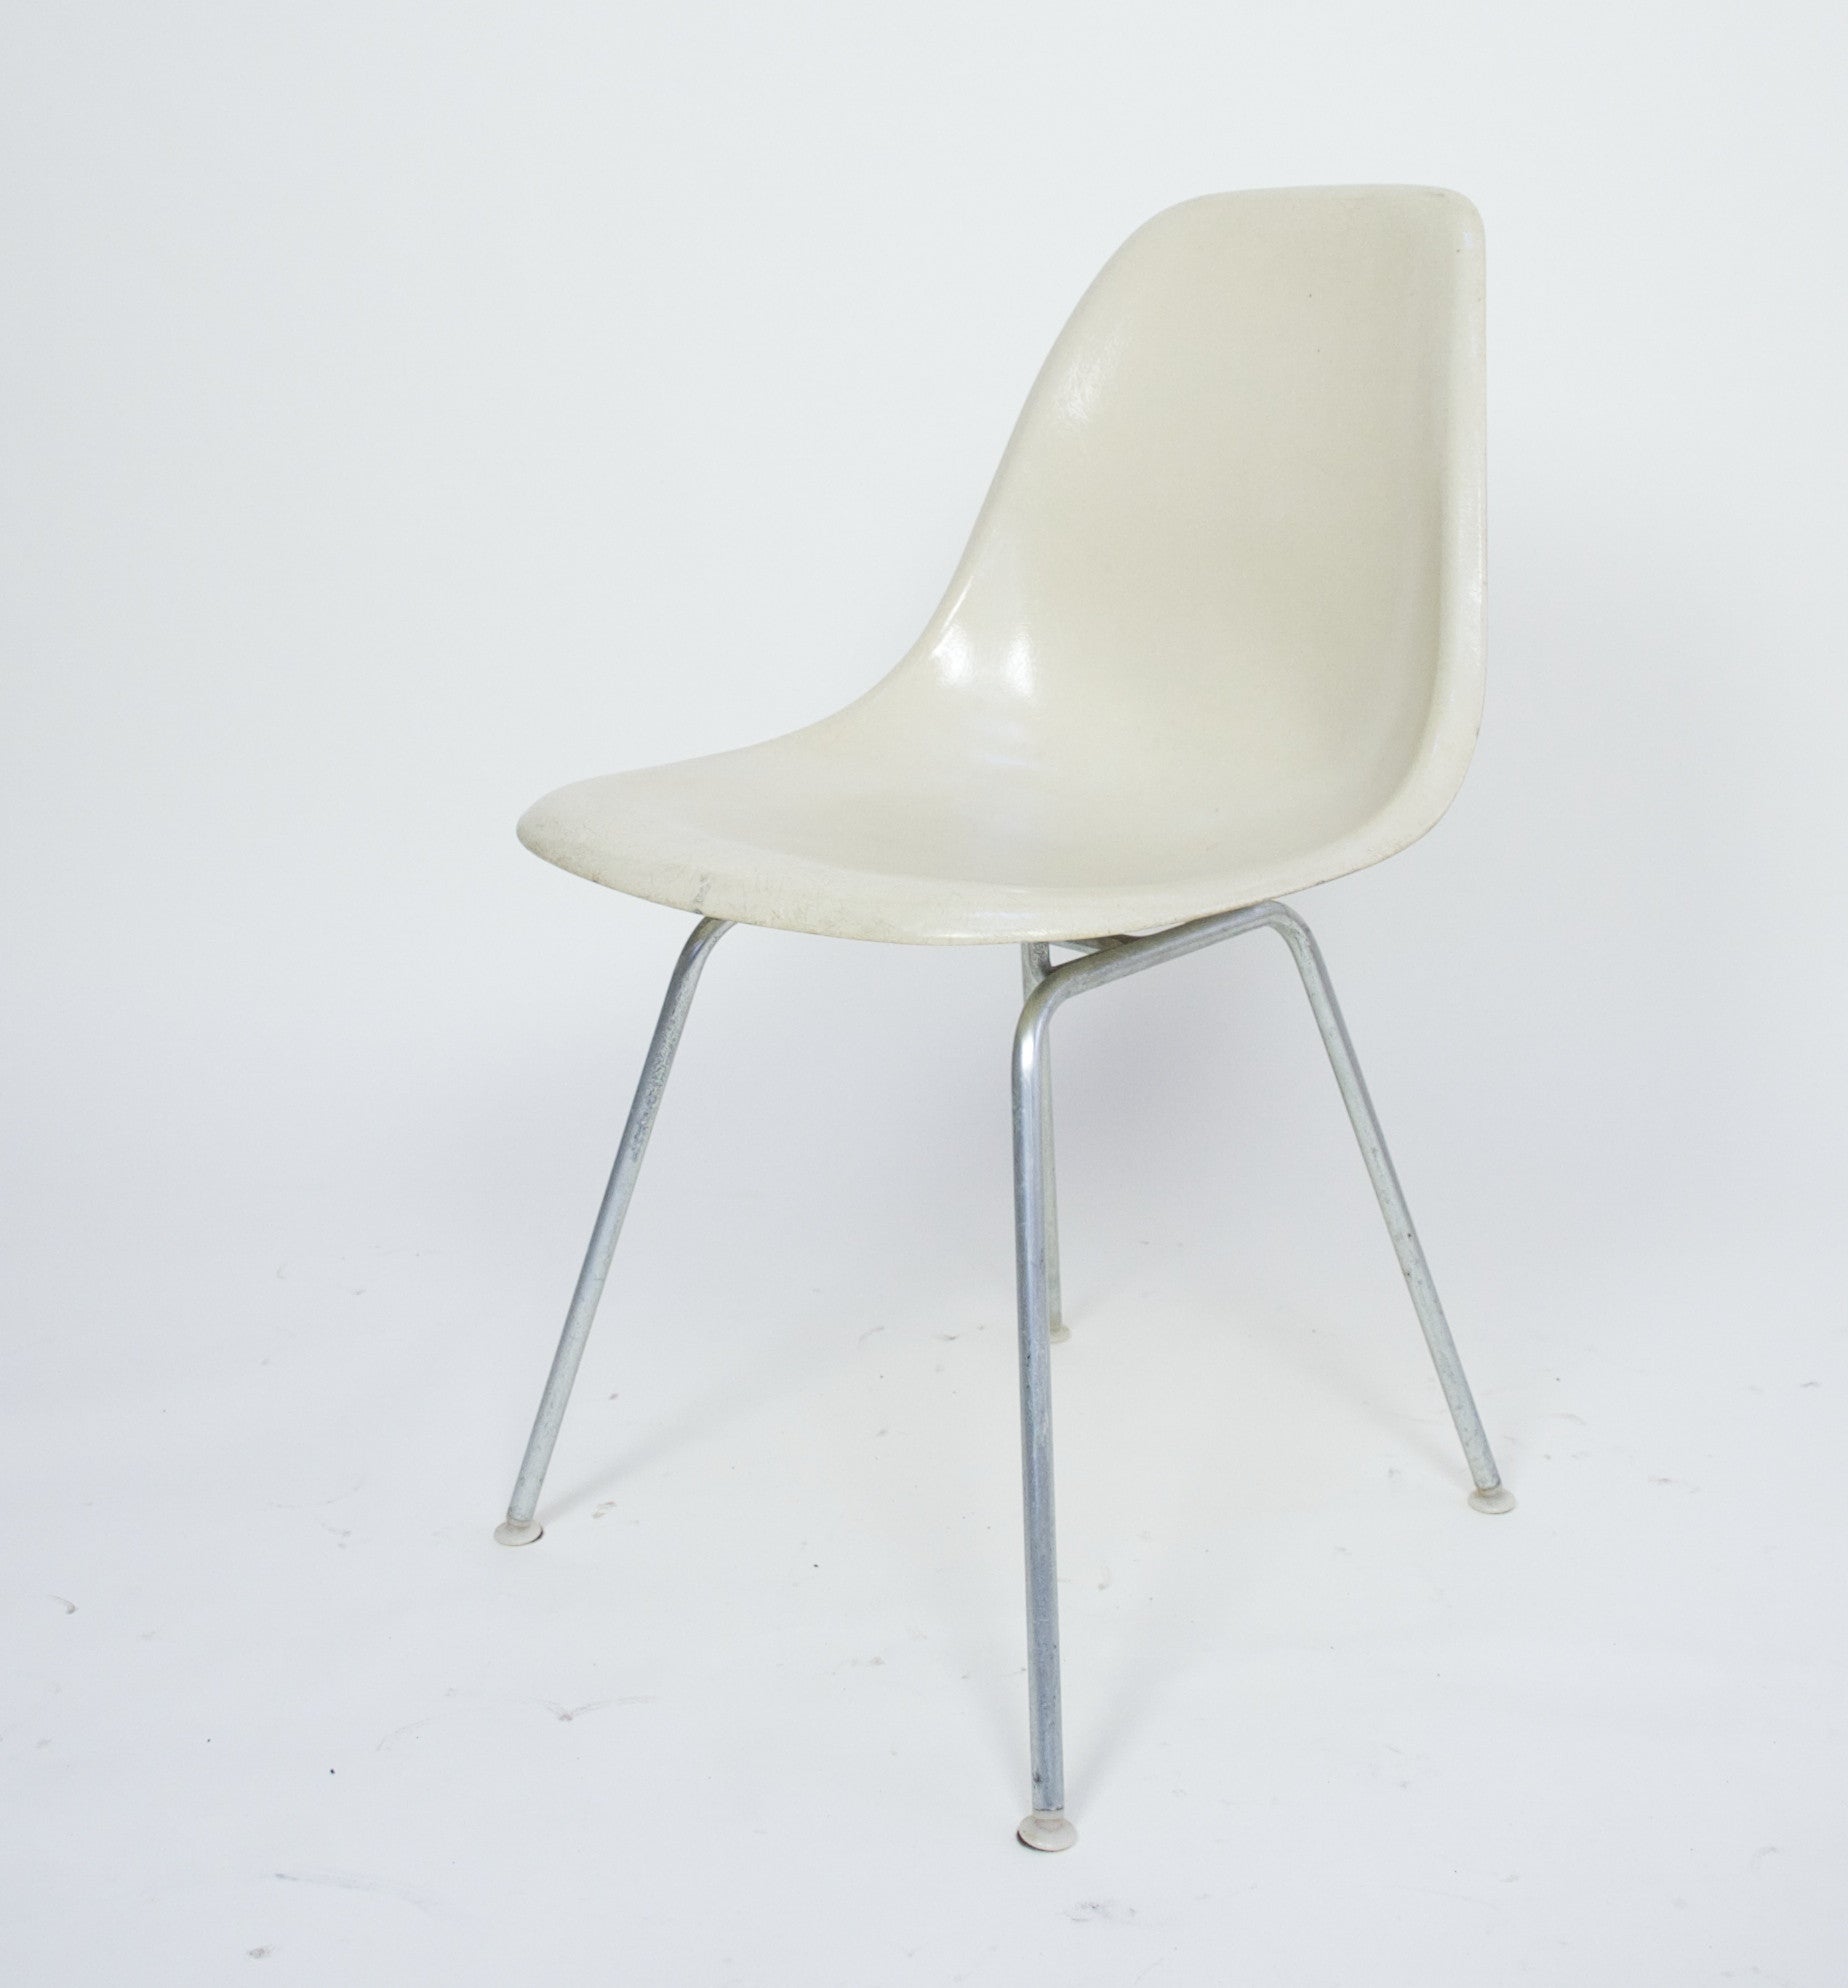 SOLD Original Set Of 6 White / Parchment Eames Herman Miller Fiberglass Shell Chairs